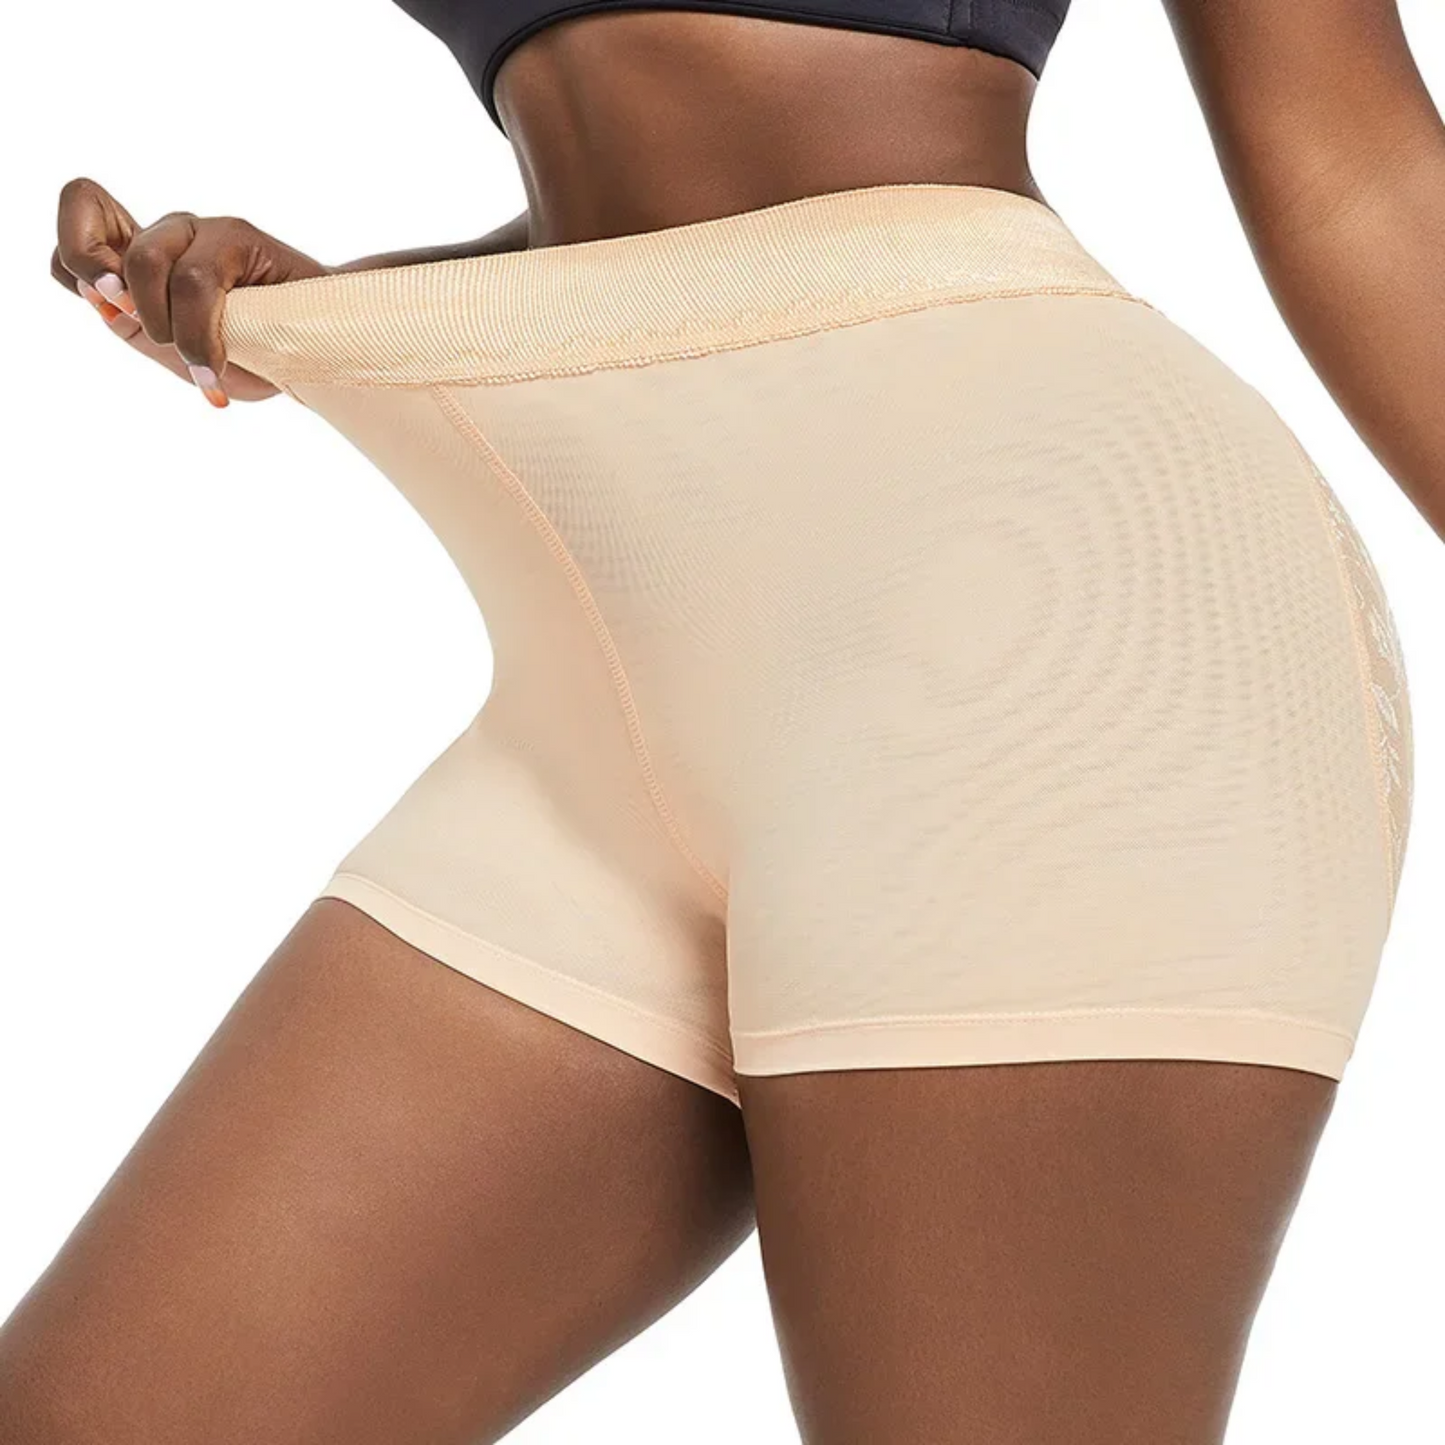 Tummy Control Butt Lift Lace Shorts With Butt Pads